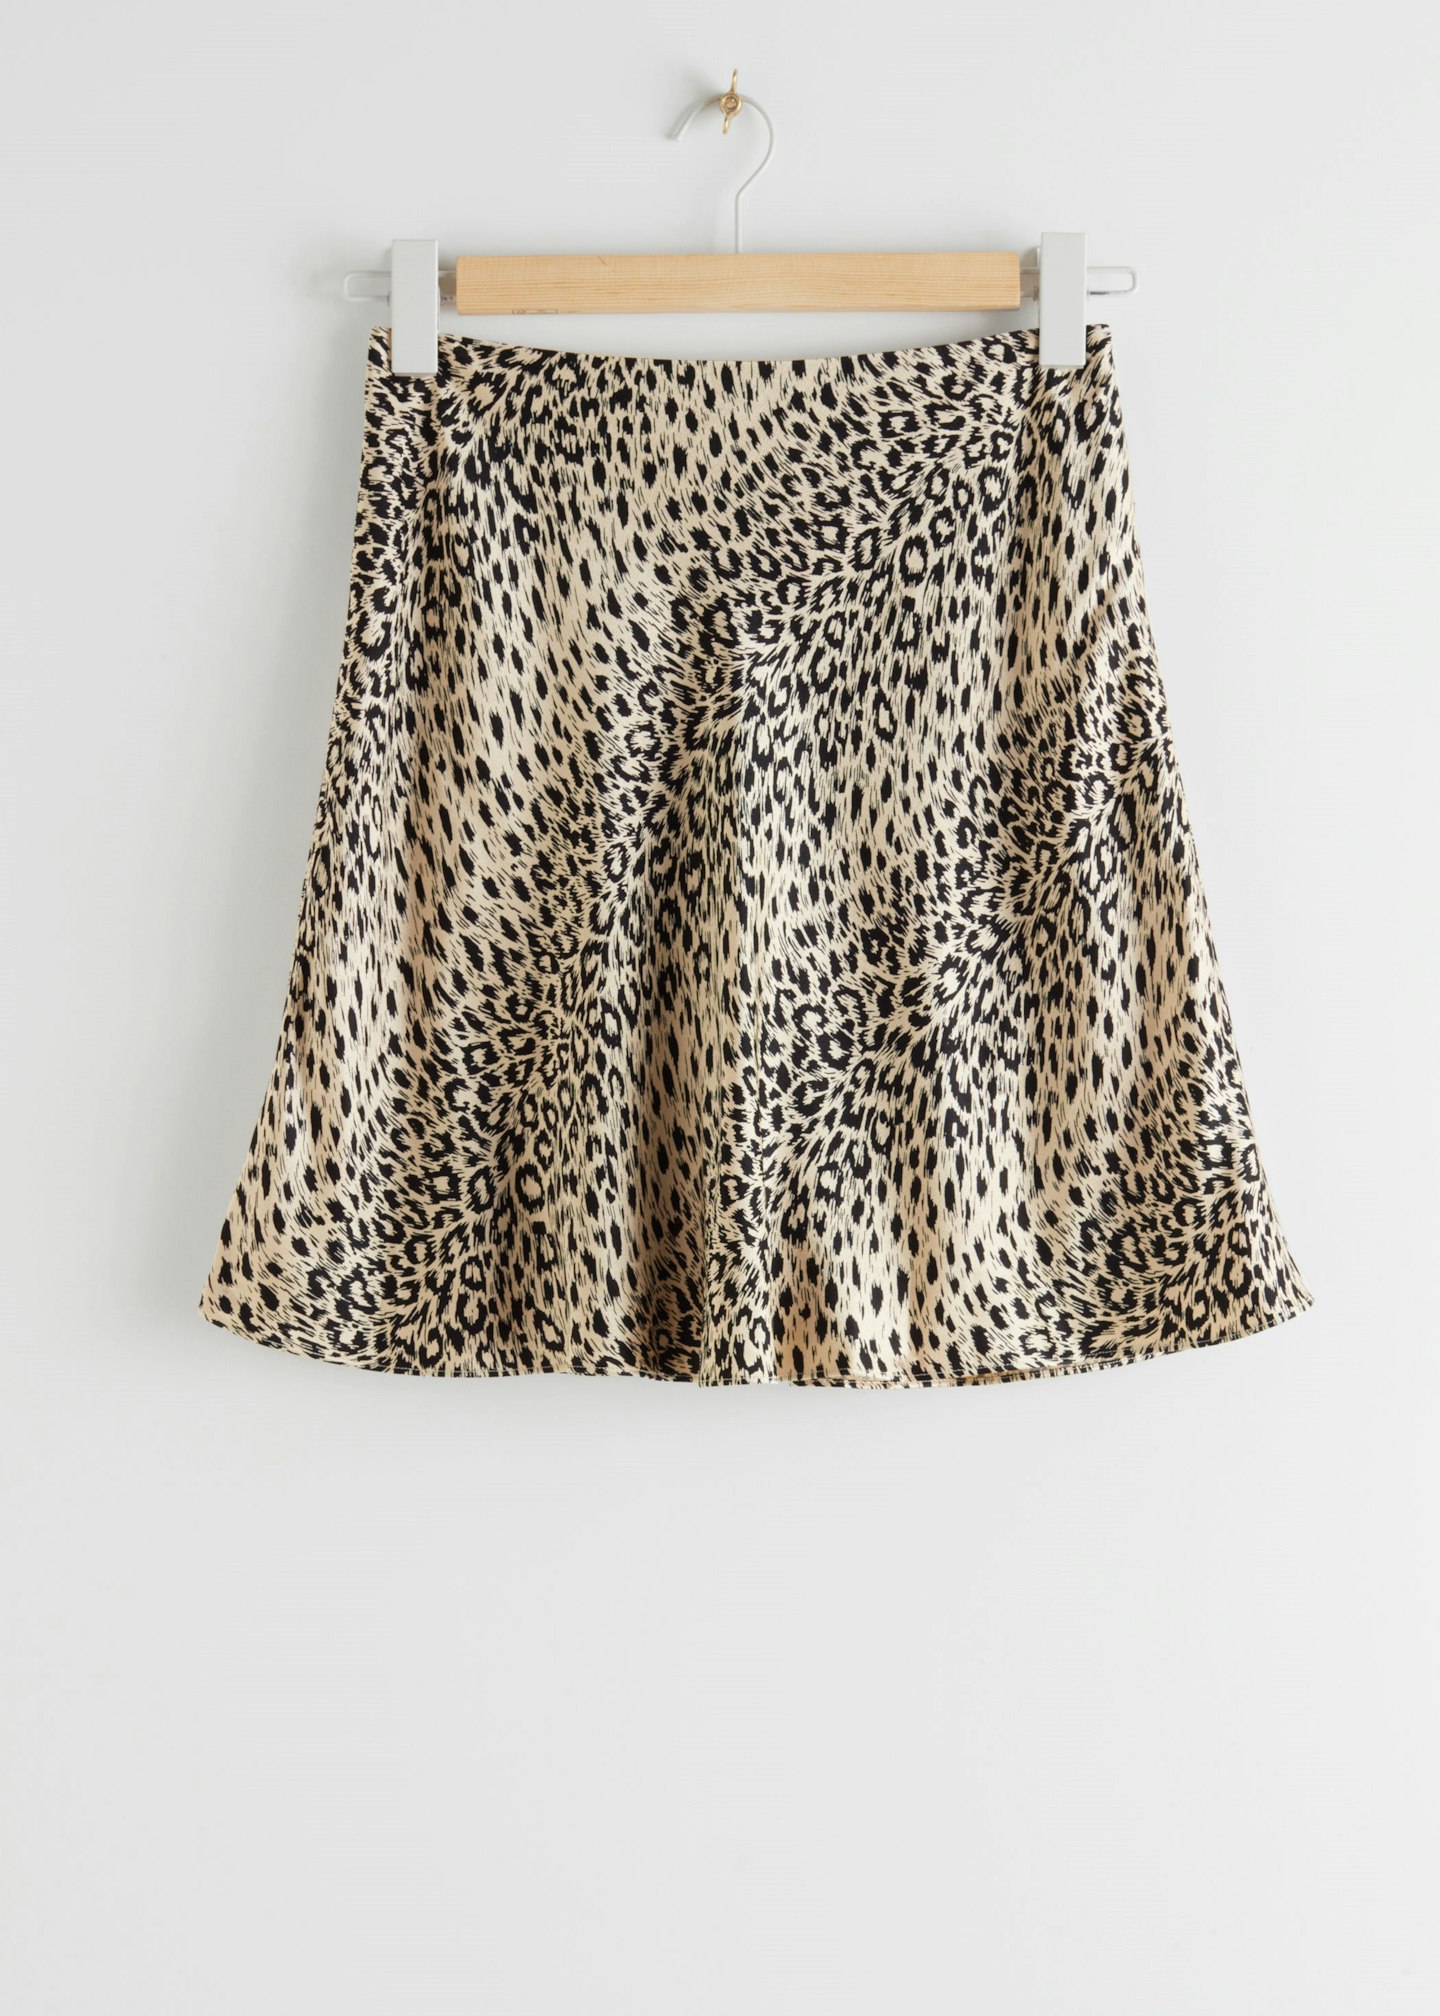 & other stories skirt